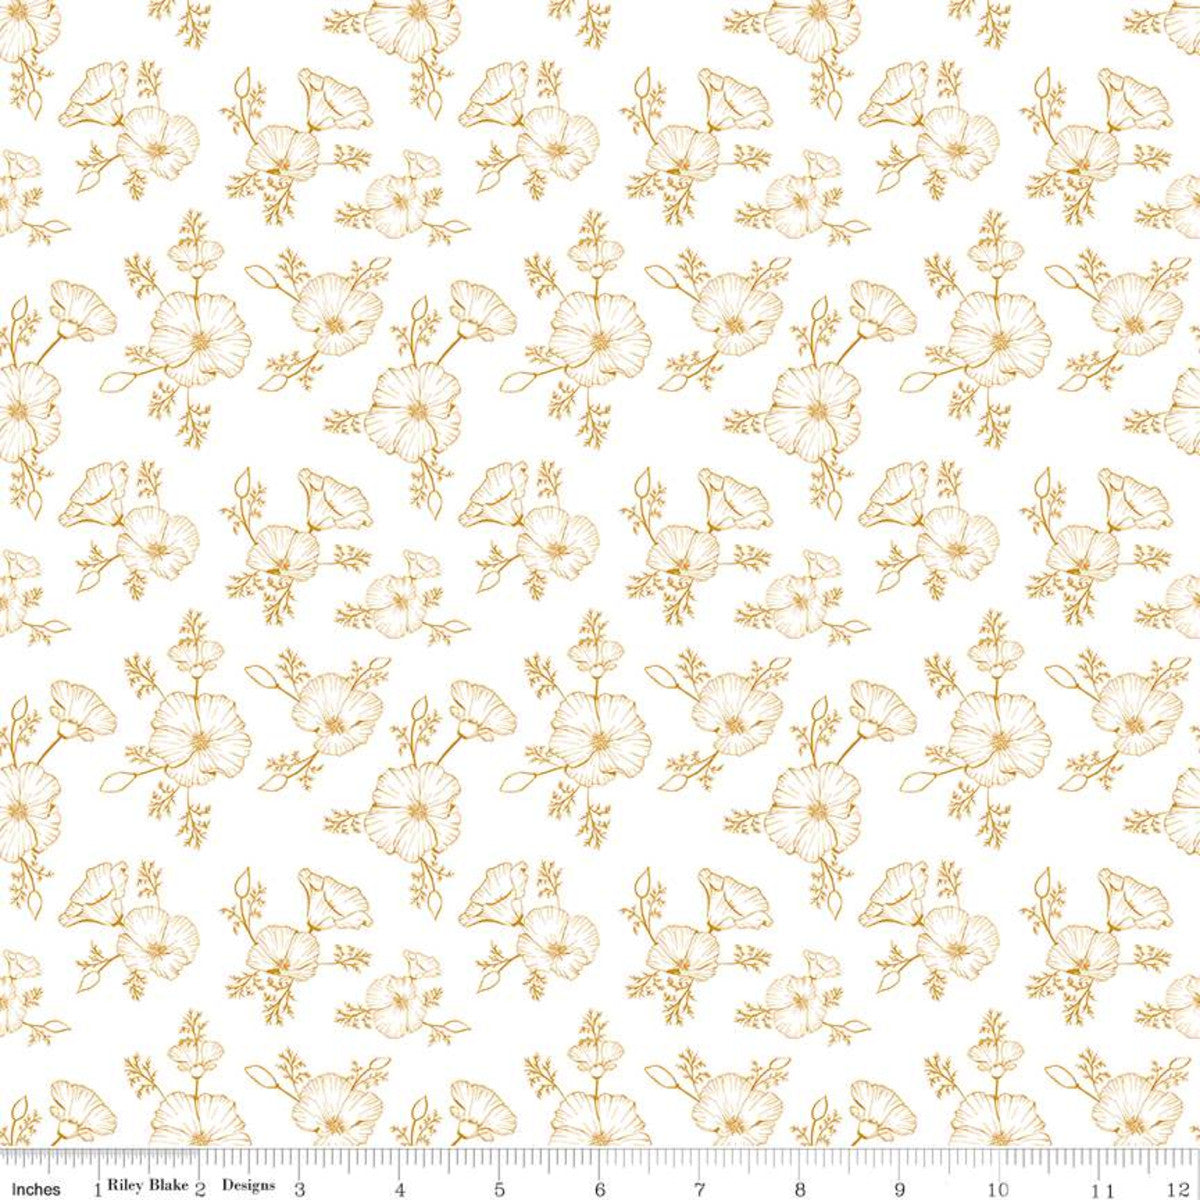 Golden Poppies Flowers Turquoise California poppy tonal tone on tone low volume white background Riley Blake Designs cotton material fabric Shaeleen Louise floral 